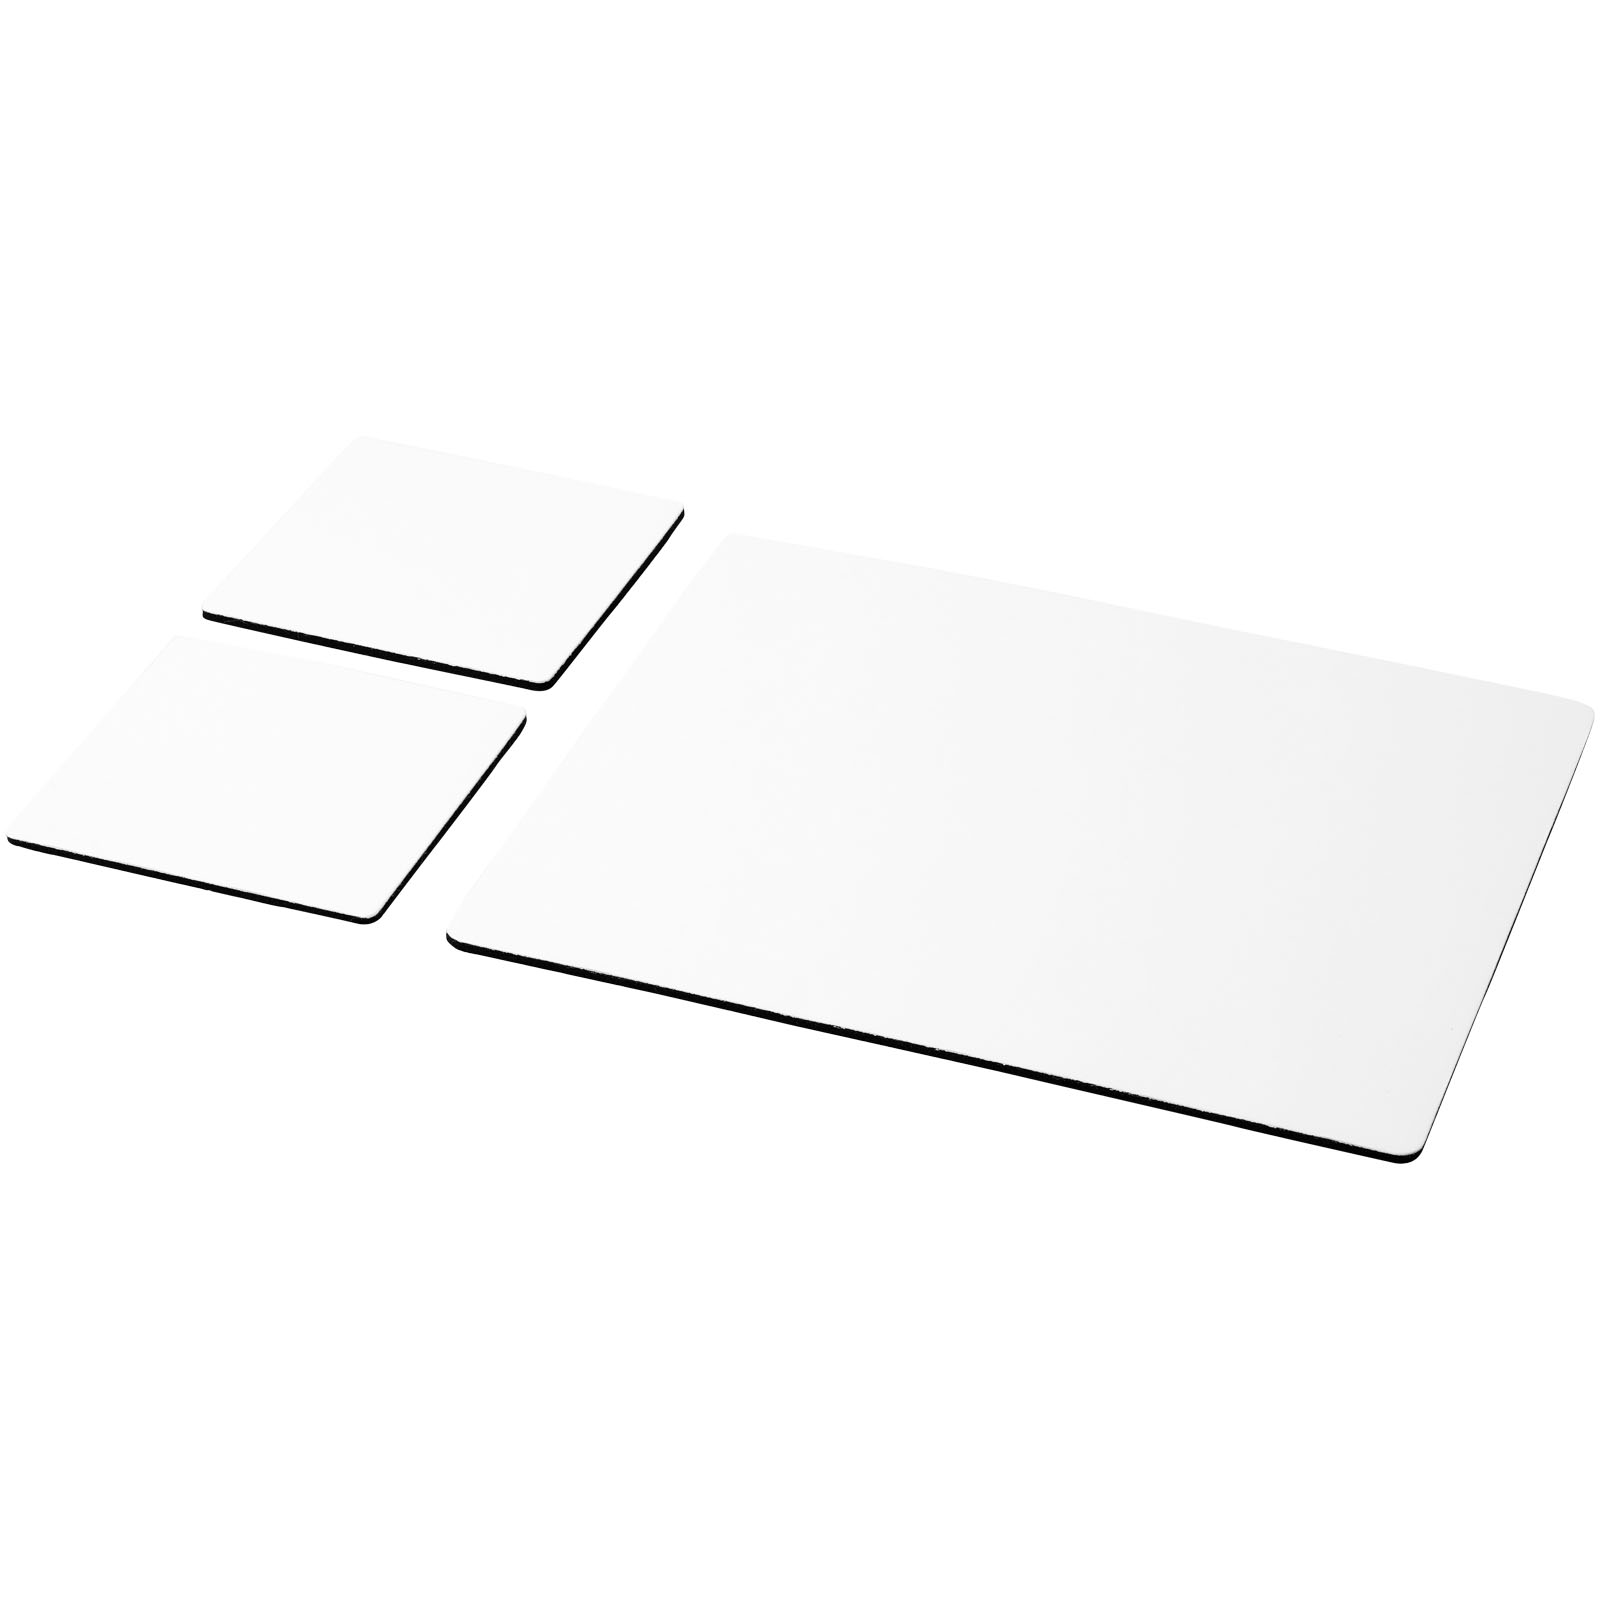 Advertising Computer Accessories - Q-Mat® mouse mat and coaster set combo 3 - 3